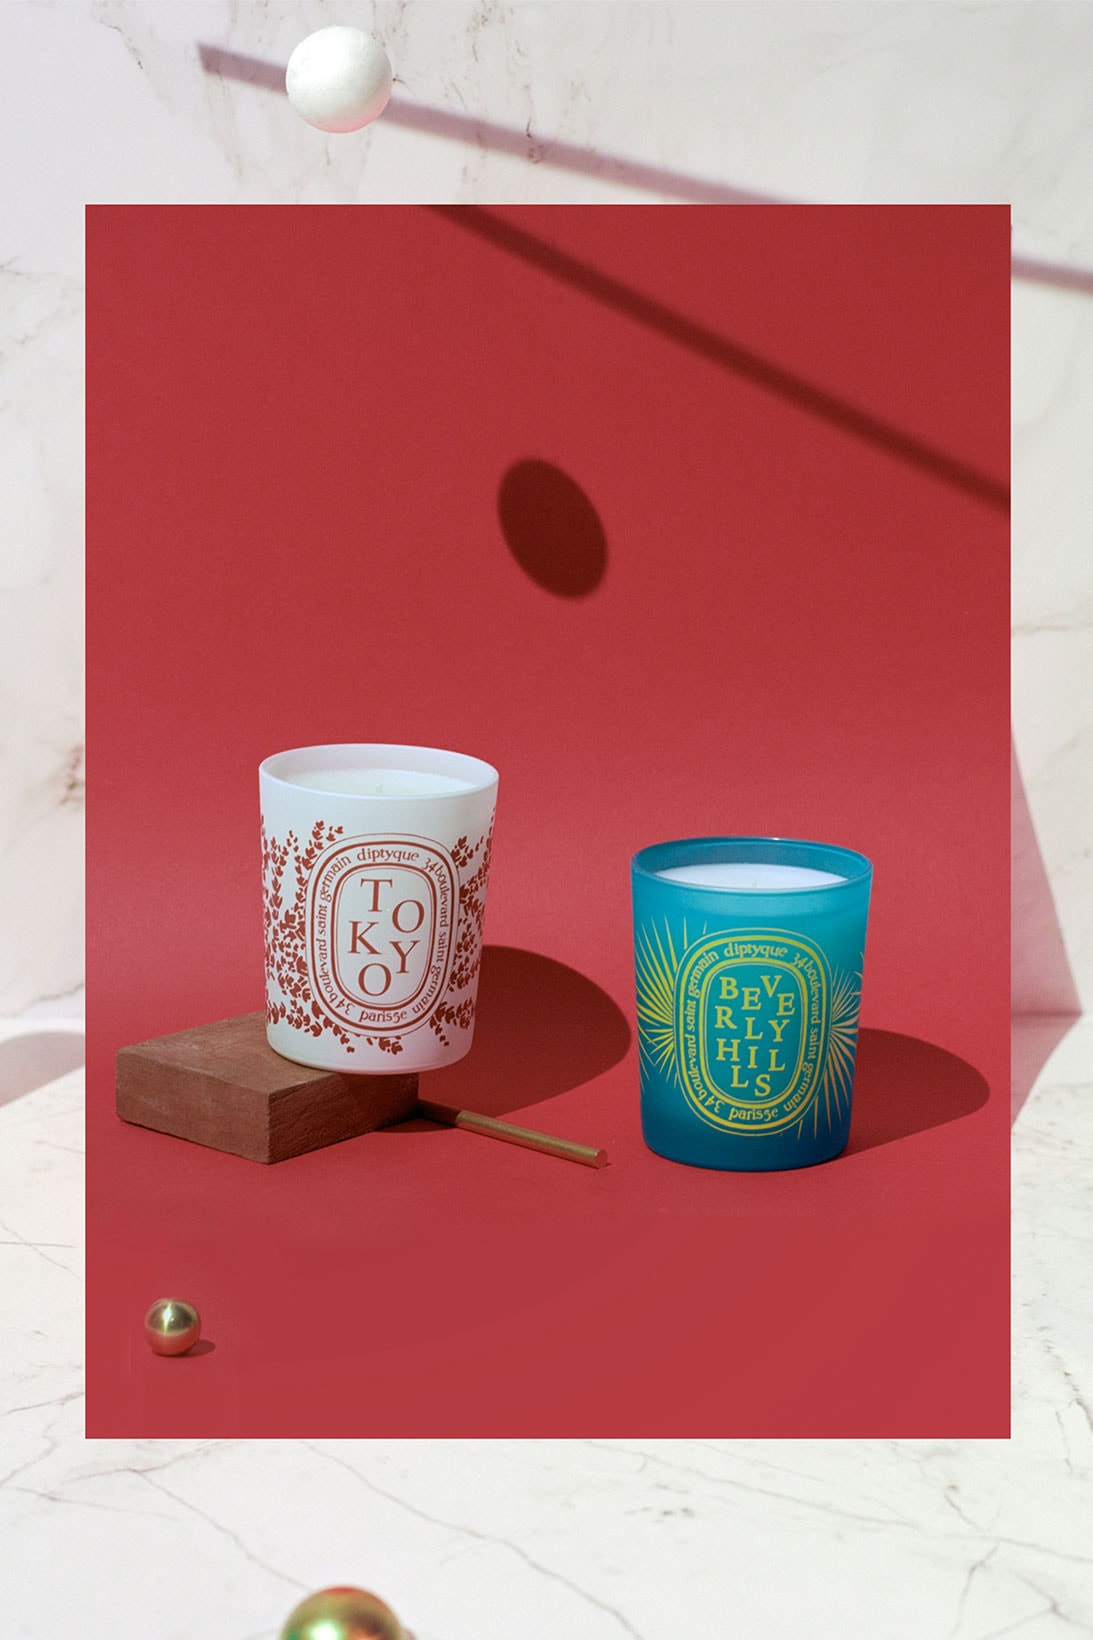 diptyque city exclusive candles online release info scented fragrance home new york paris hong kong tokyo